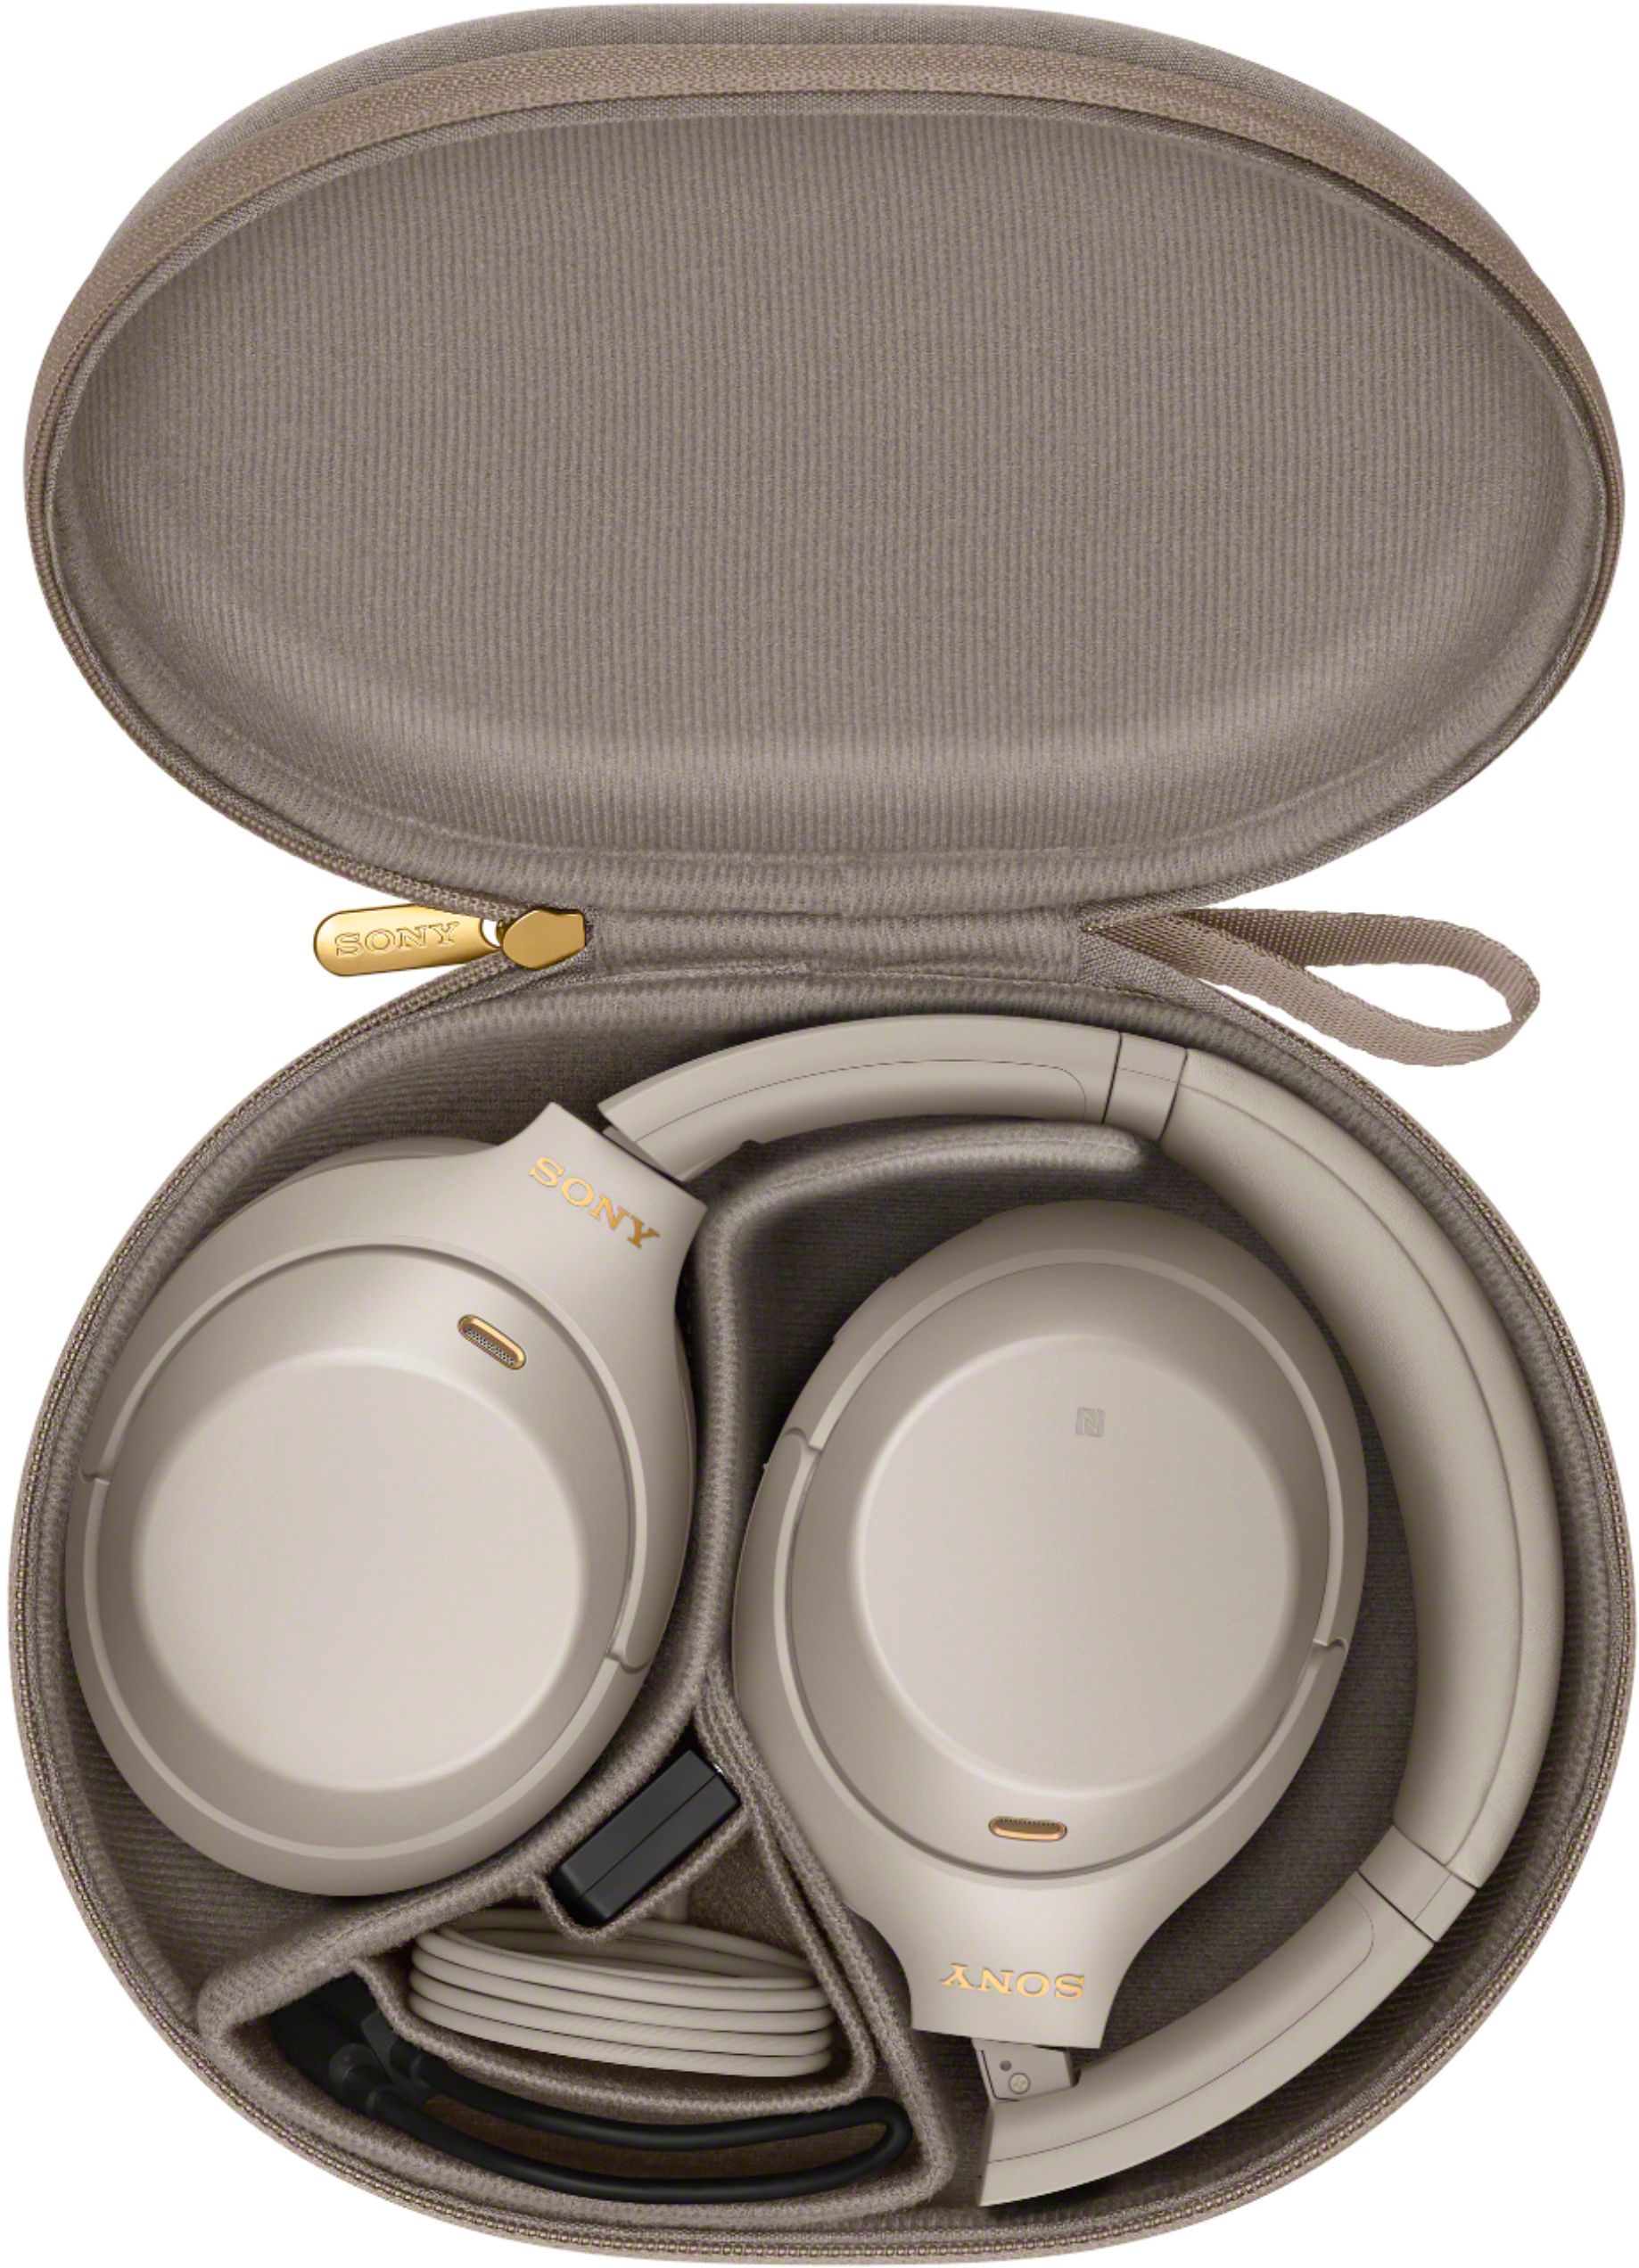 Sony WH-1000XM4 Wireless Noise-Cancelling Over-the-Ear Headphones Silver  WH1000XM4/S - Best Buy